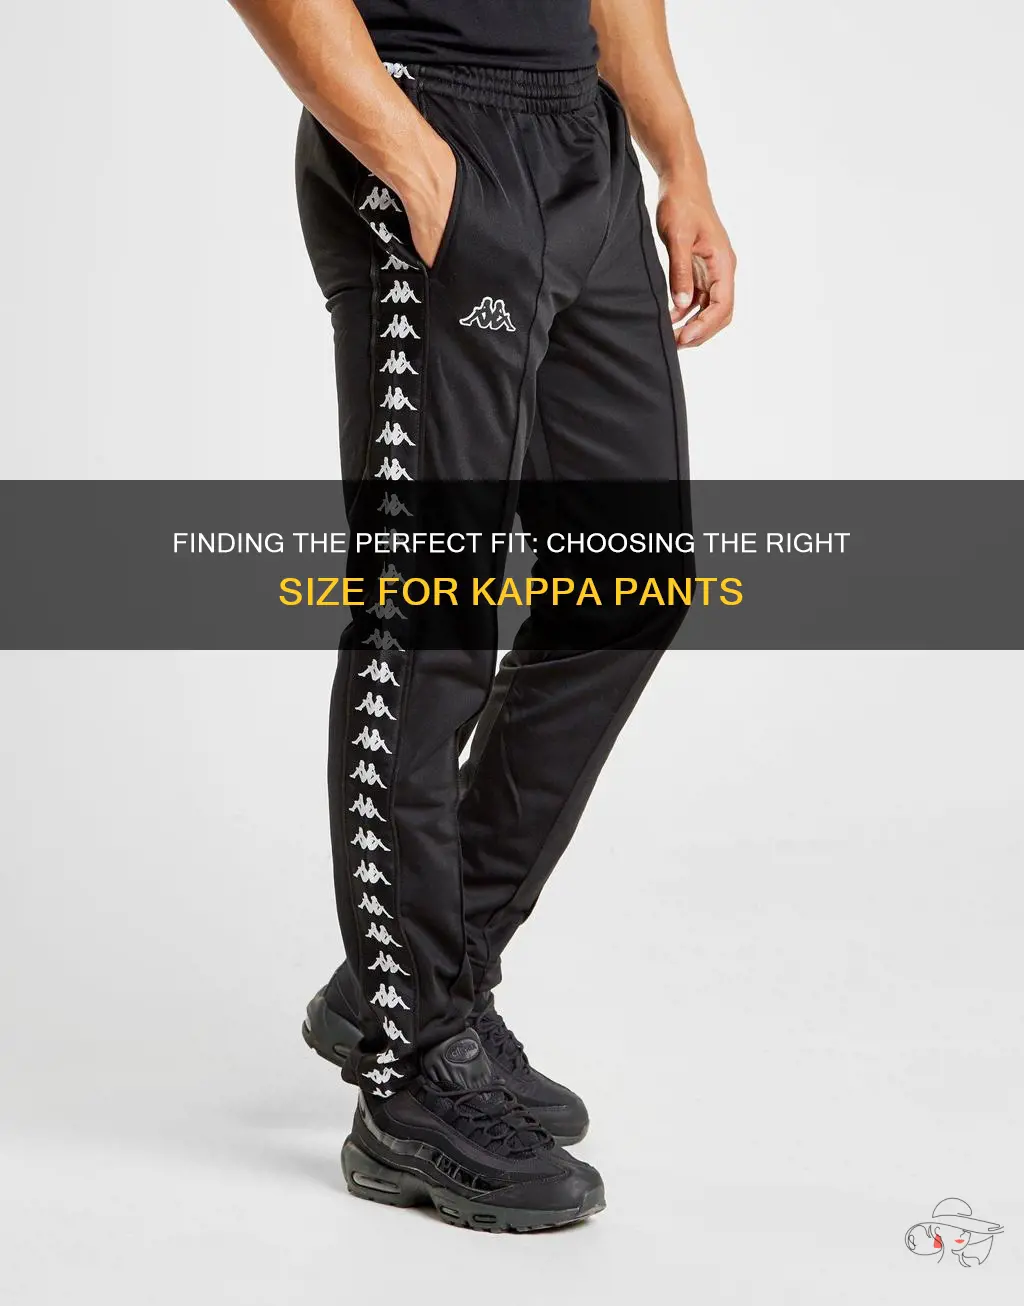 what size should I get for kappa pants